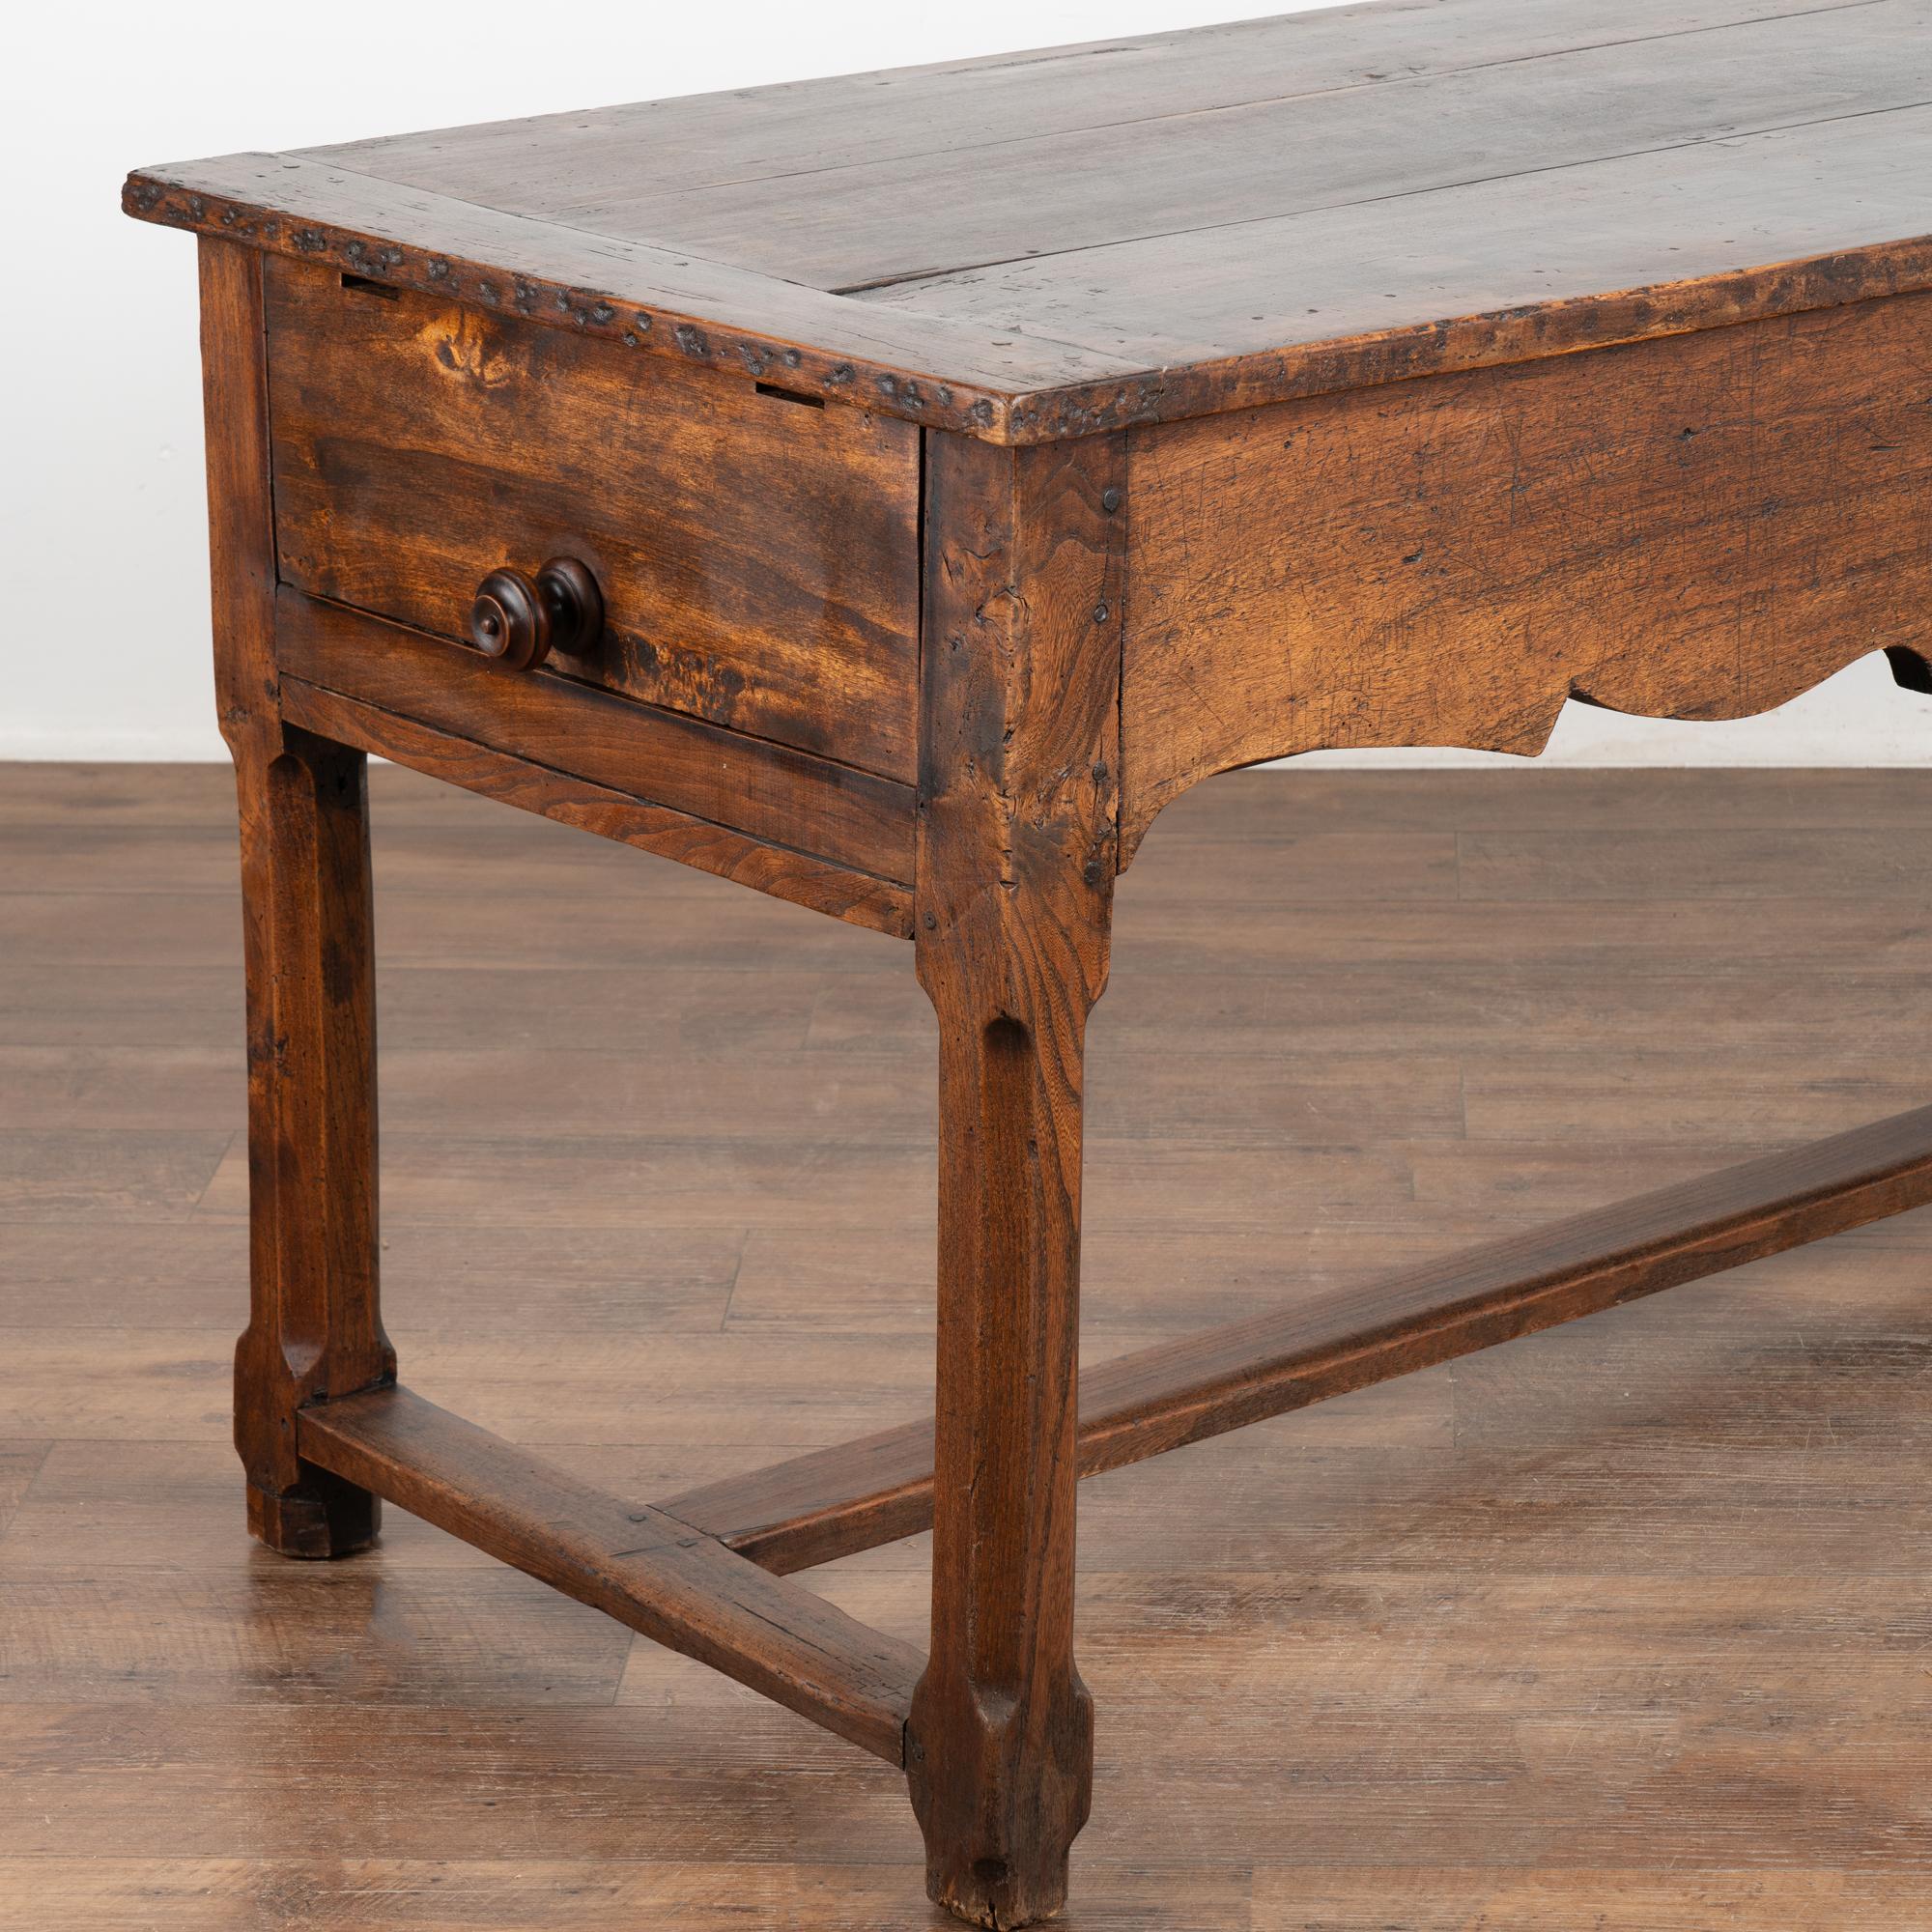 Wood Antique French Console Table With Drawers, circa 1800-40